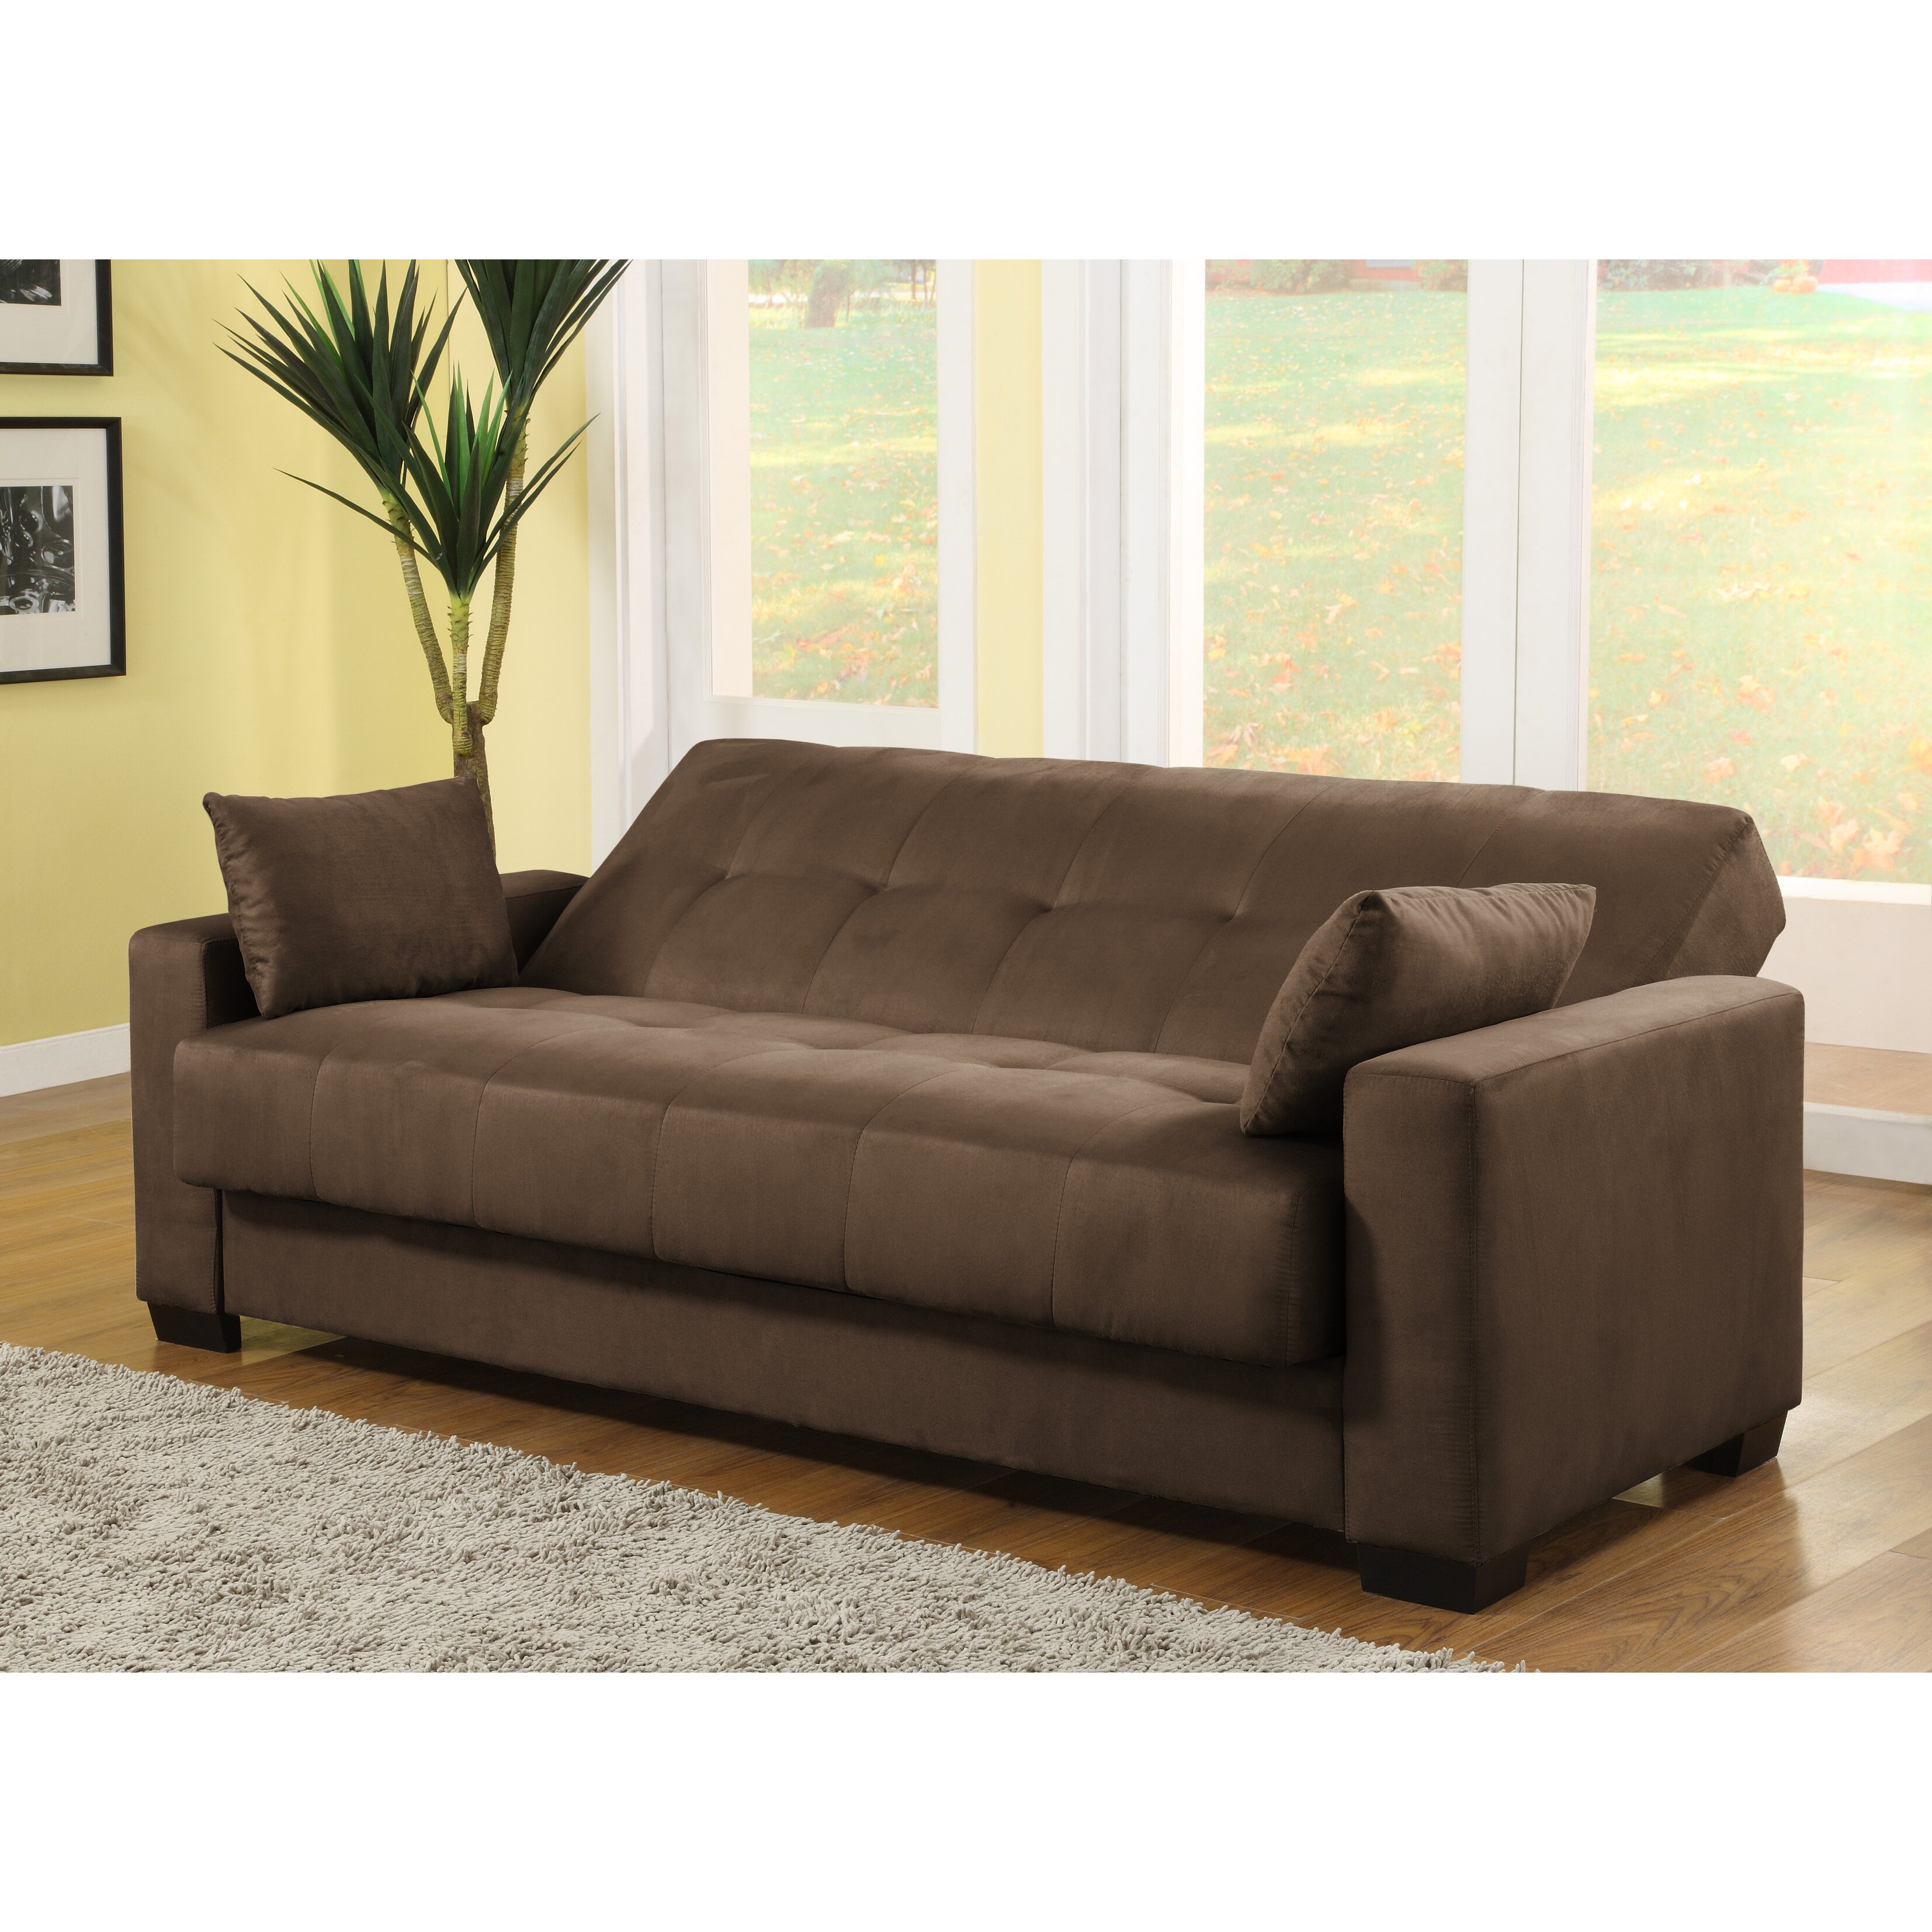 LifeStyle Solutions Casual Convertibles Sleeper Sofa ...